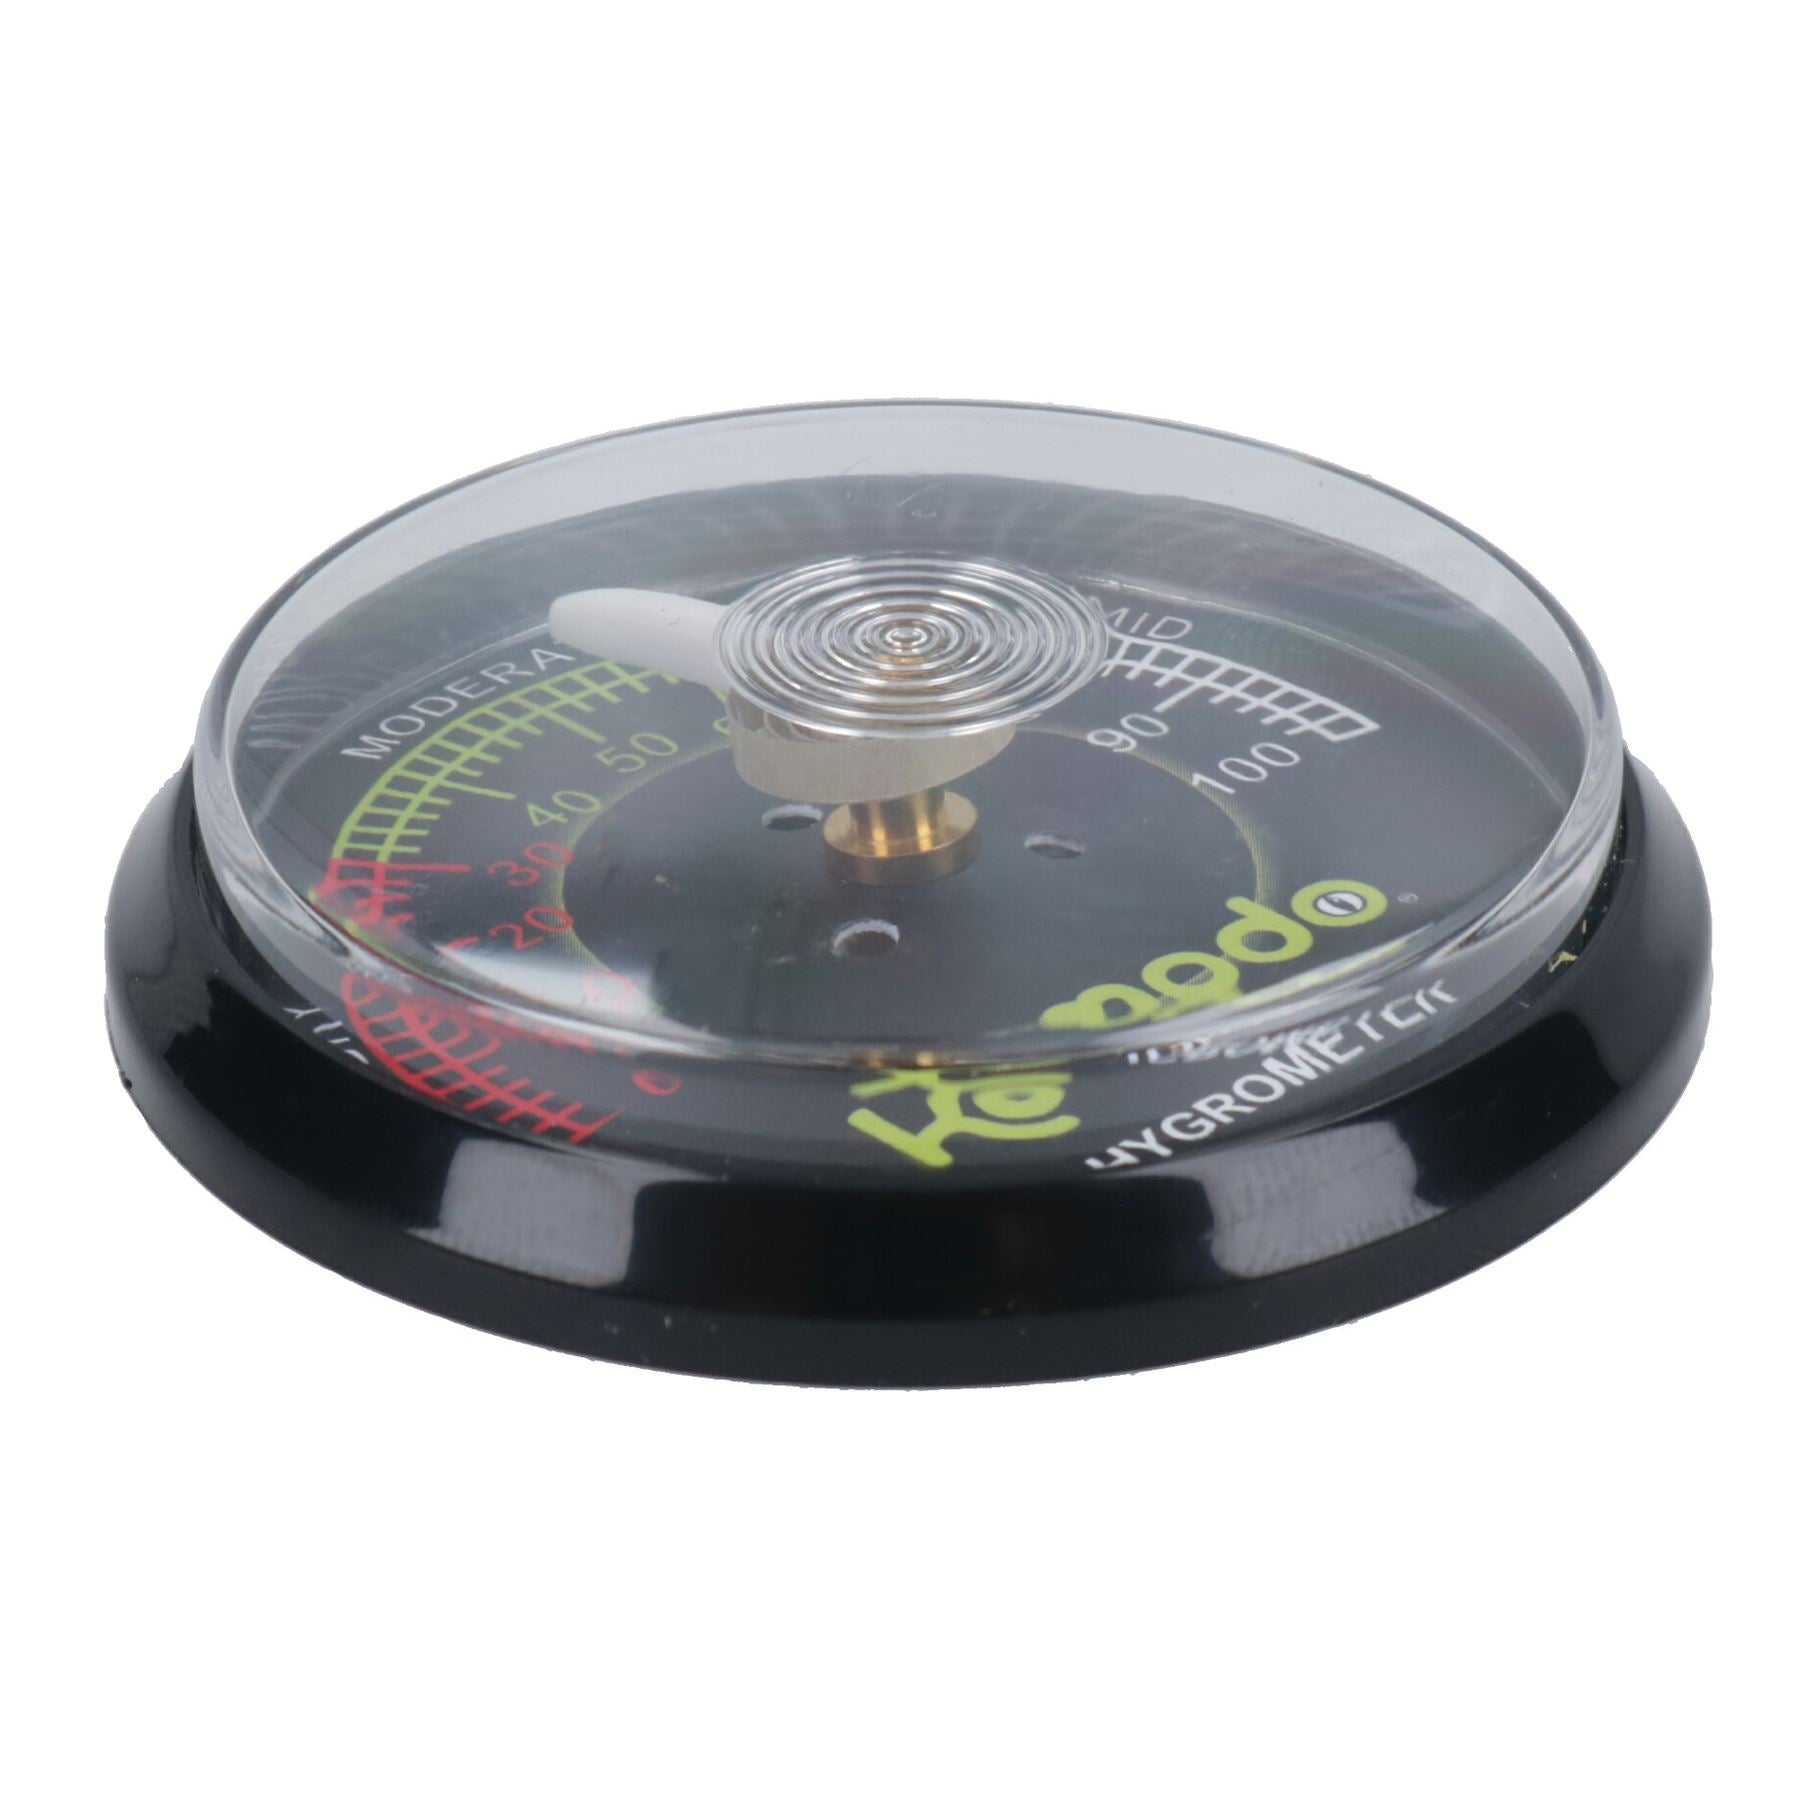 Reptile Mountable Analogue Humidity Hygrometer Gauge Monitor  Colour Coded